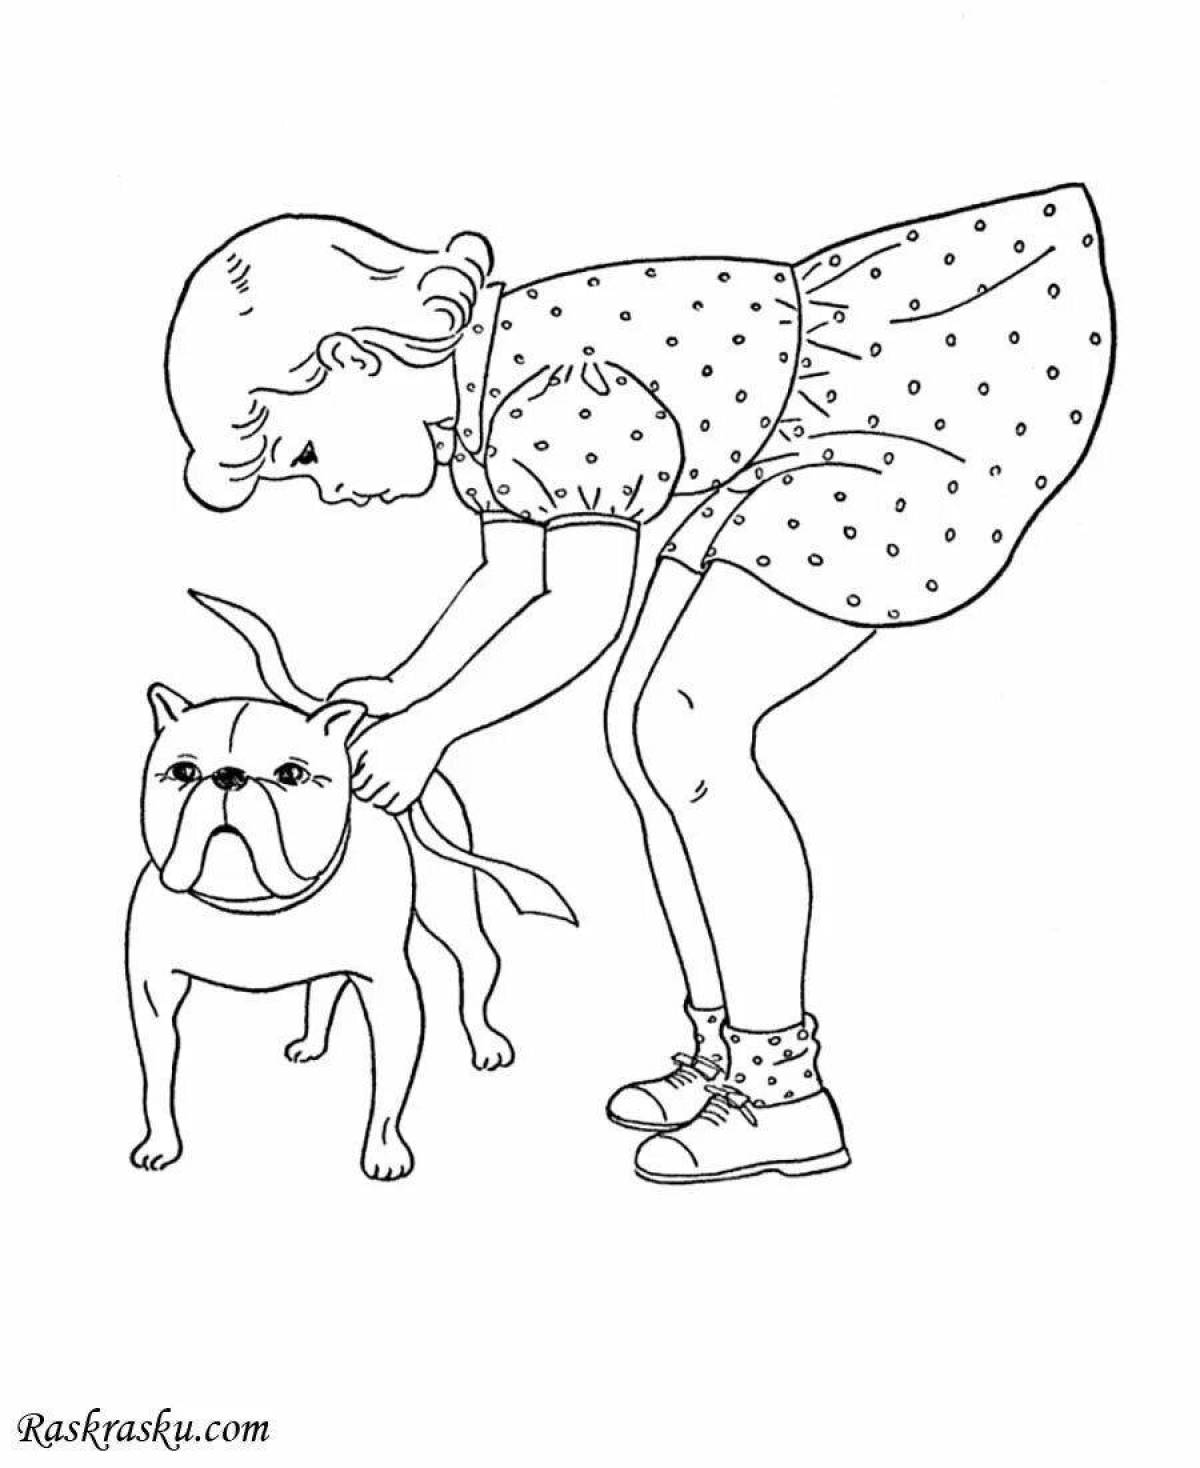 Charming coloring book girl with a dog